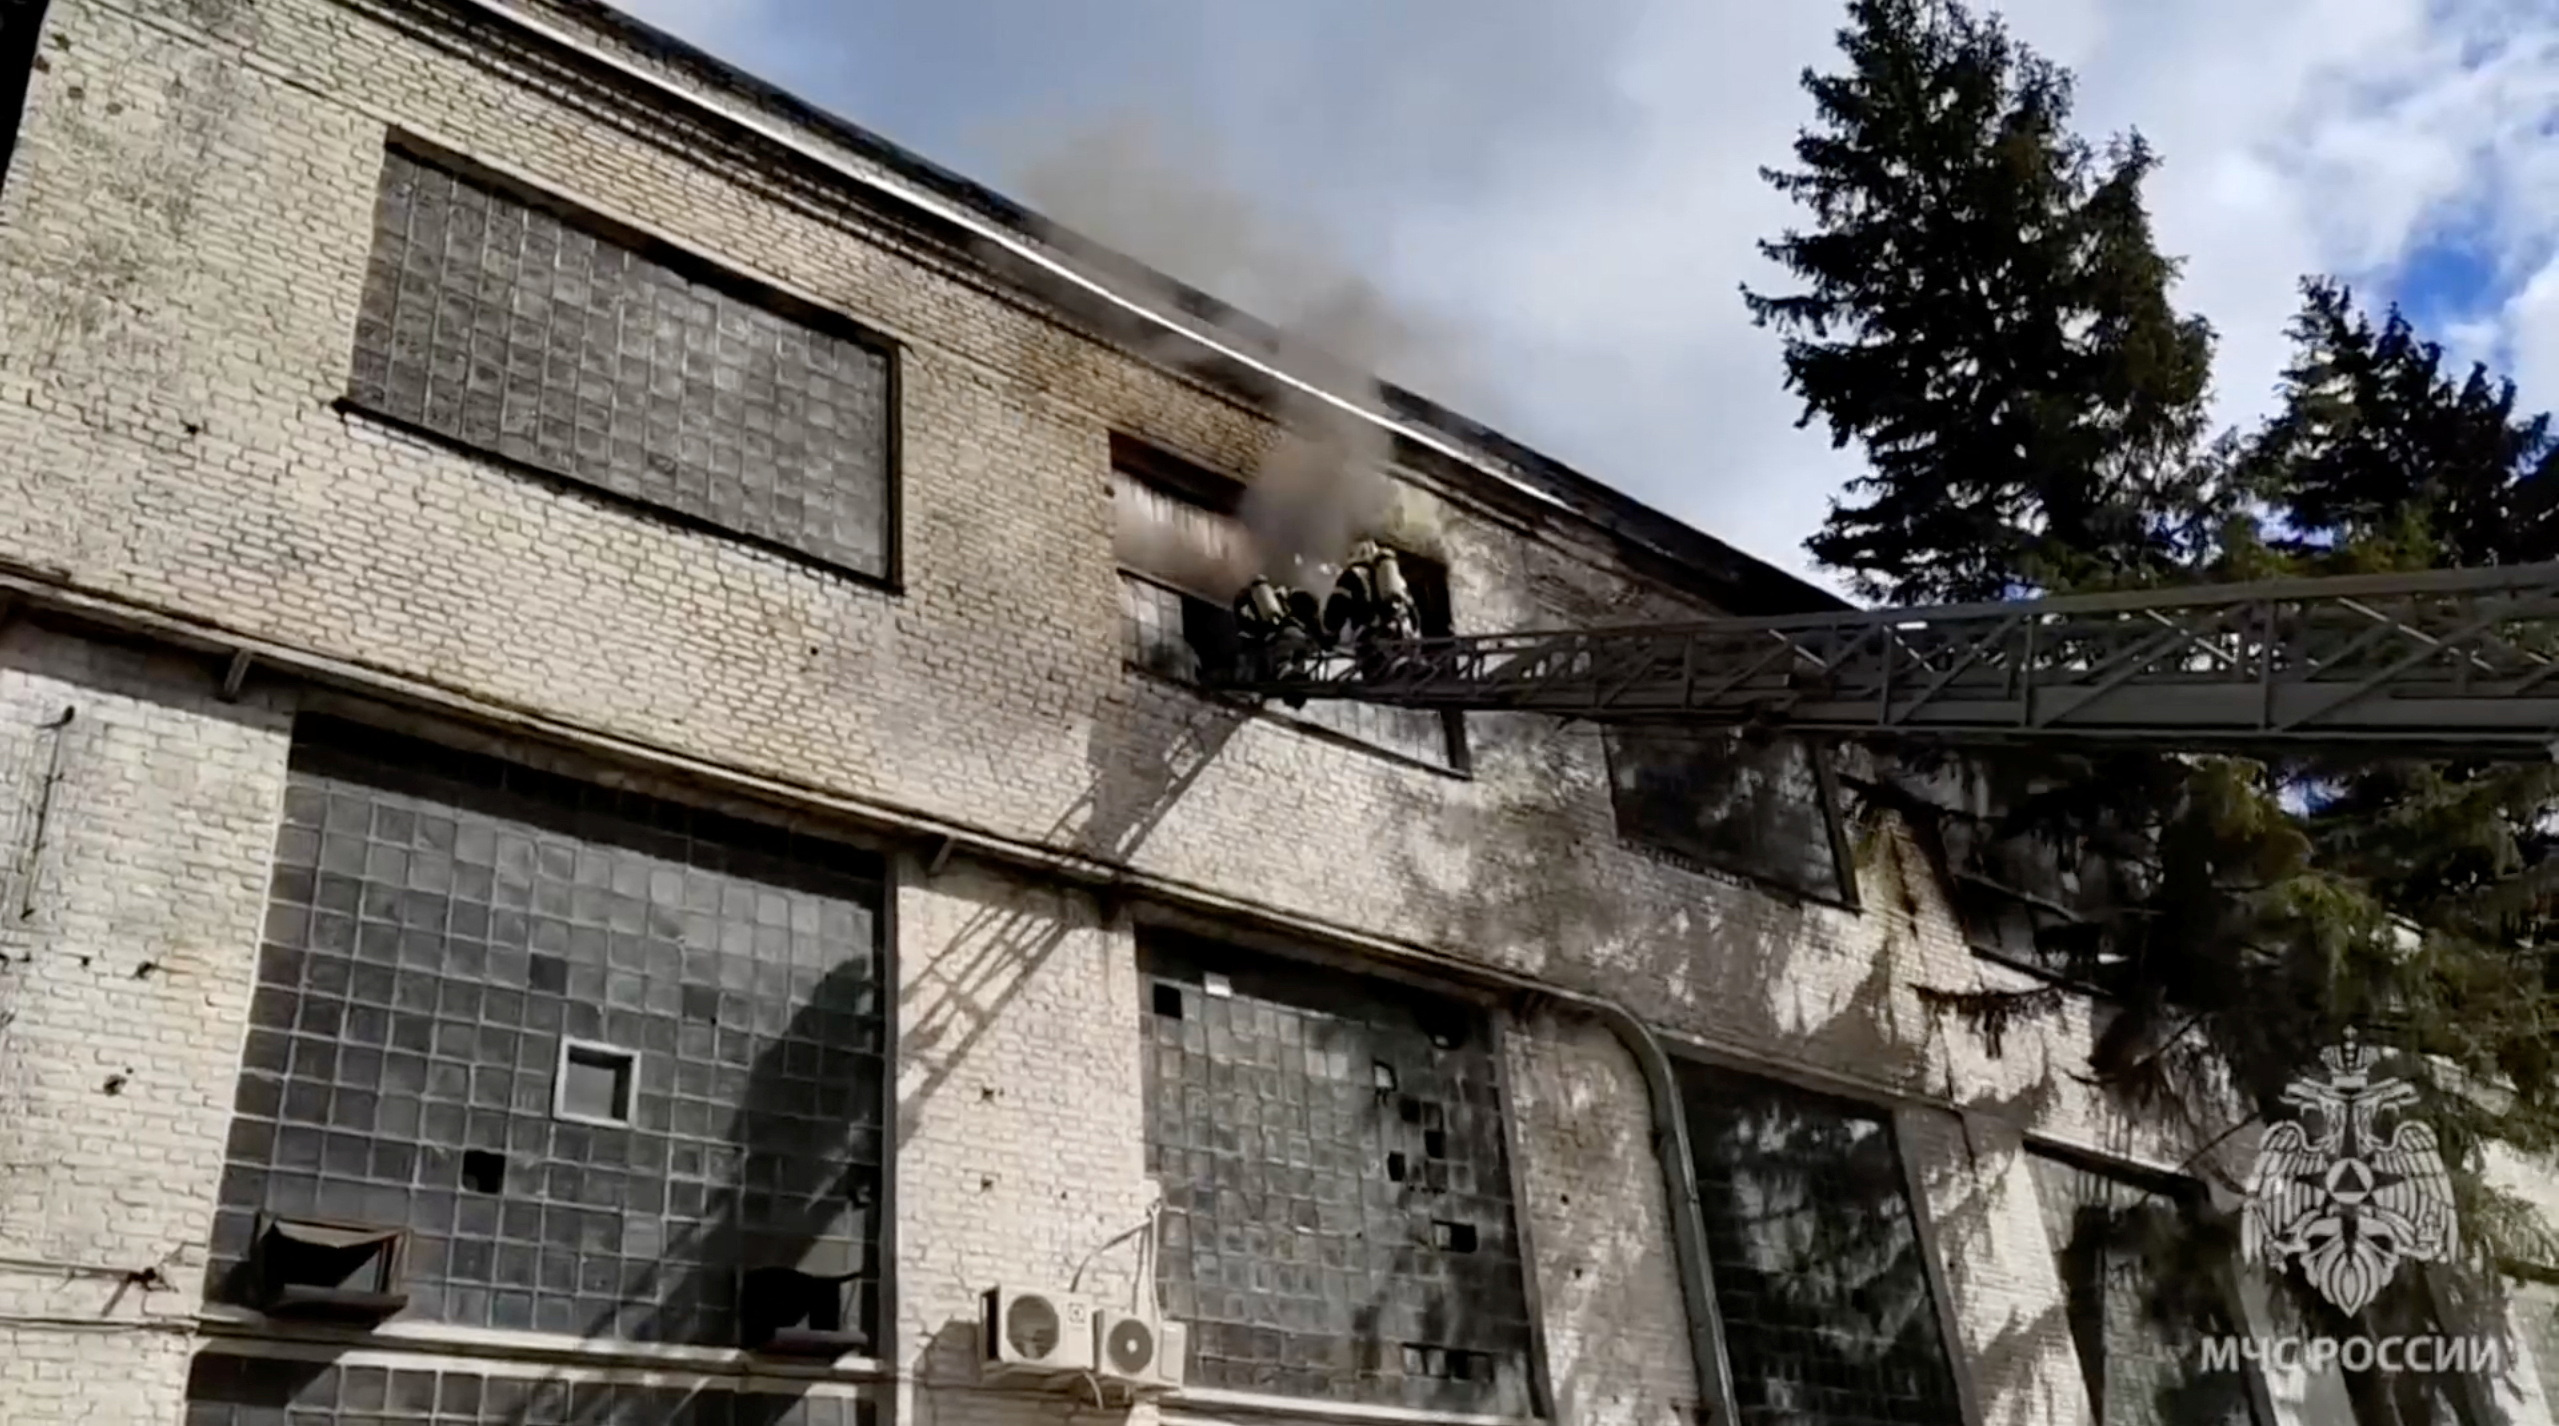 Fire at Russian electric equipment plant